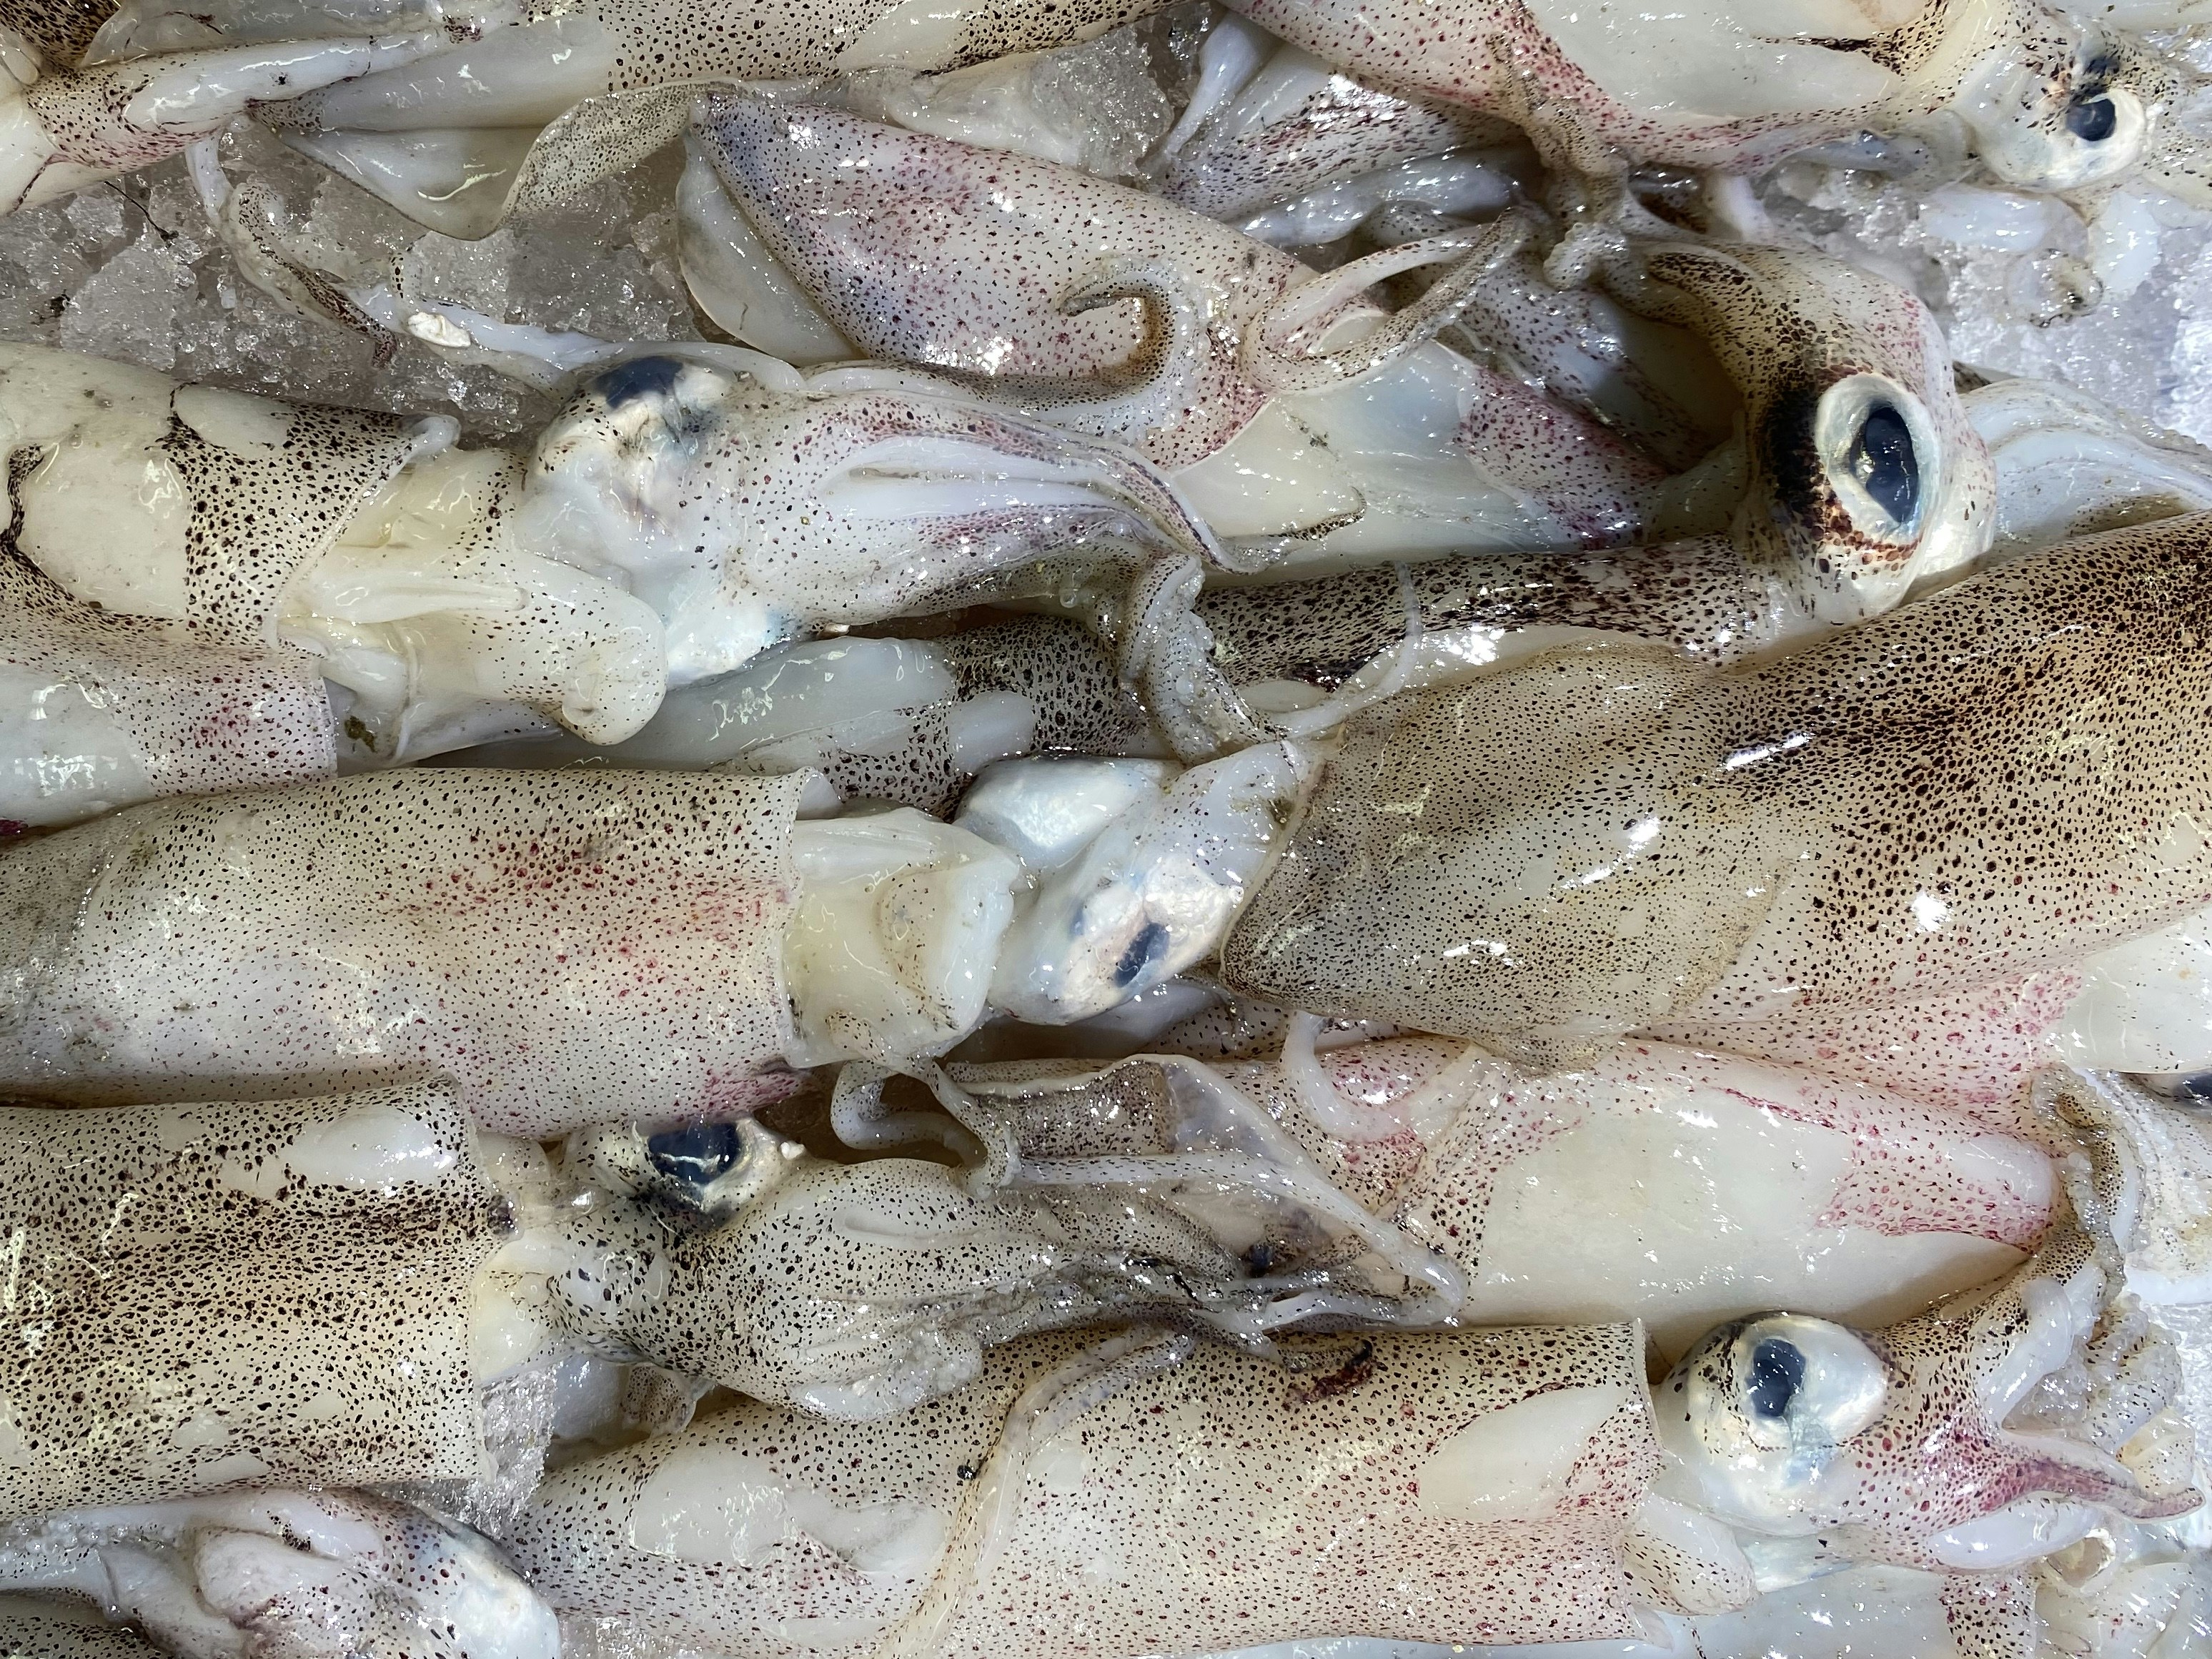 squid on display in our local supermarket